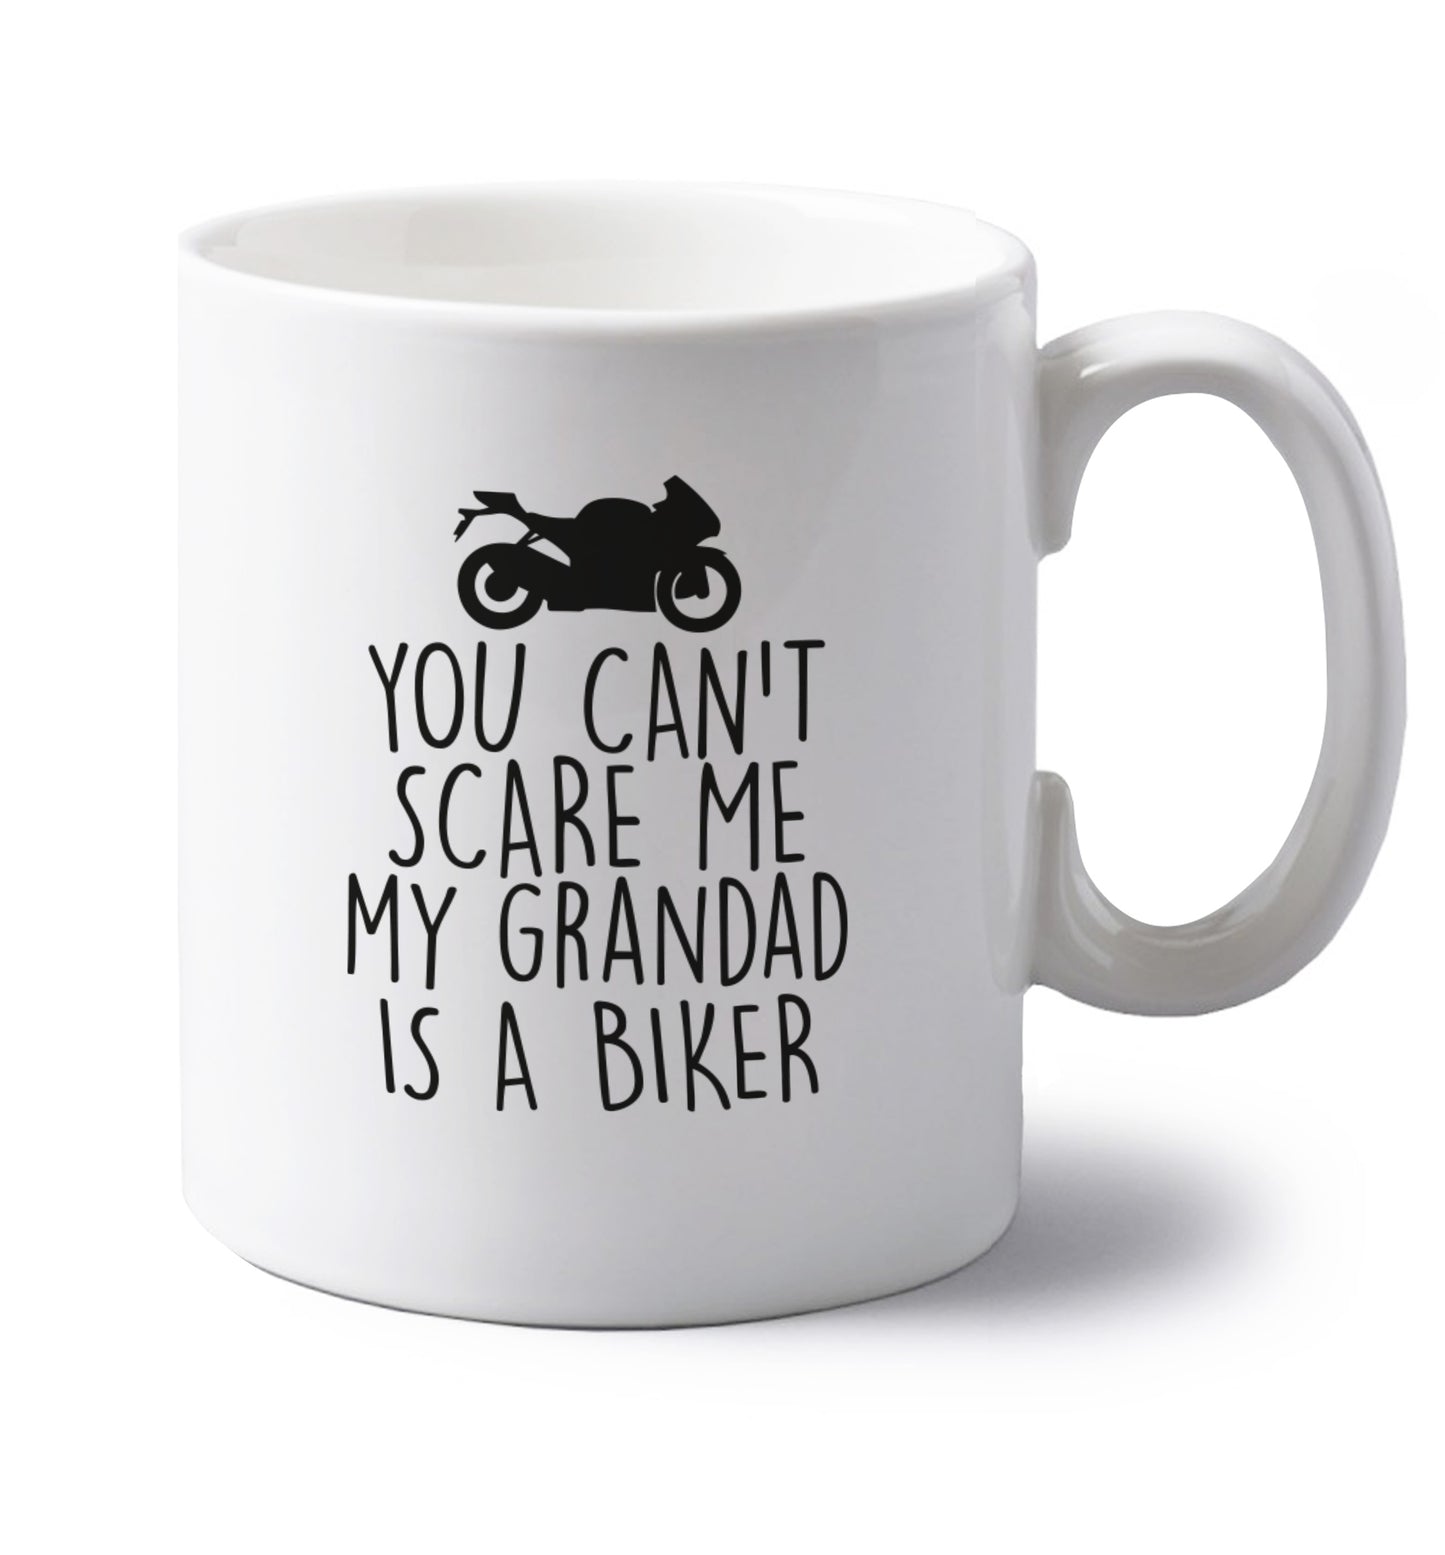 You can't scare me my grandad is a biker left handed white ceramic mug 